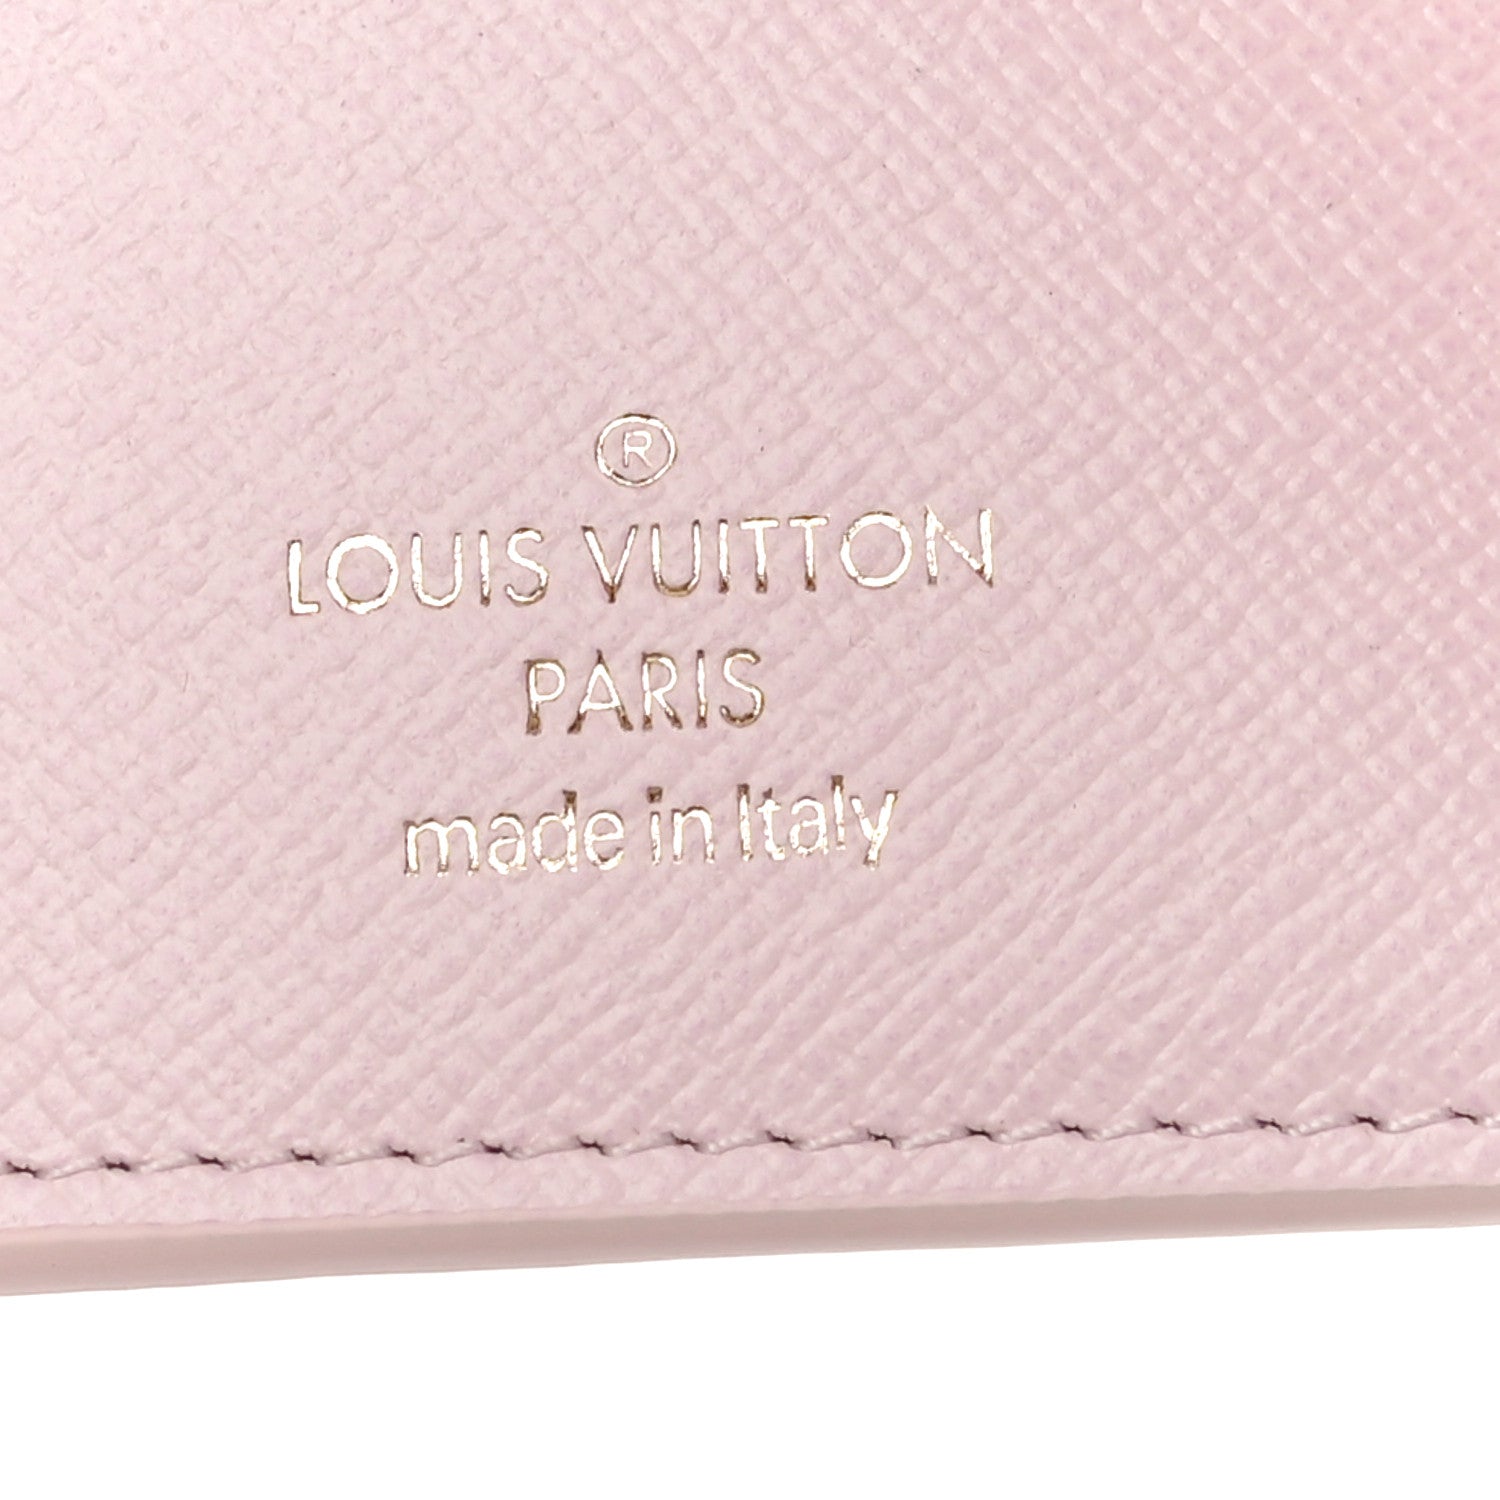 Wallet - Pink/White/Yellow/Logo – The Runway By La Chic